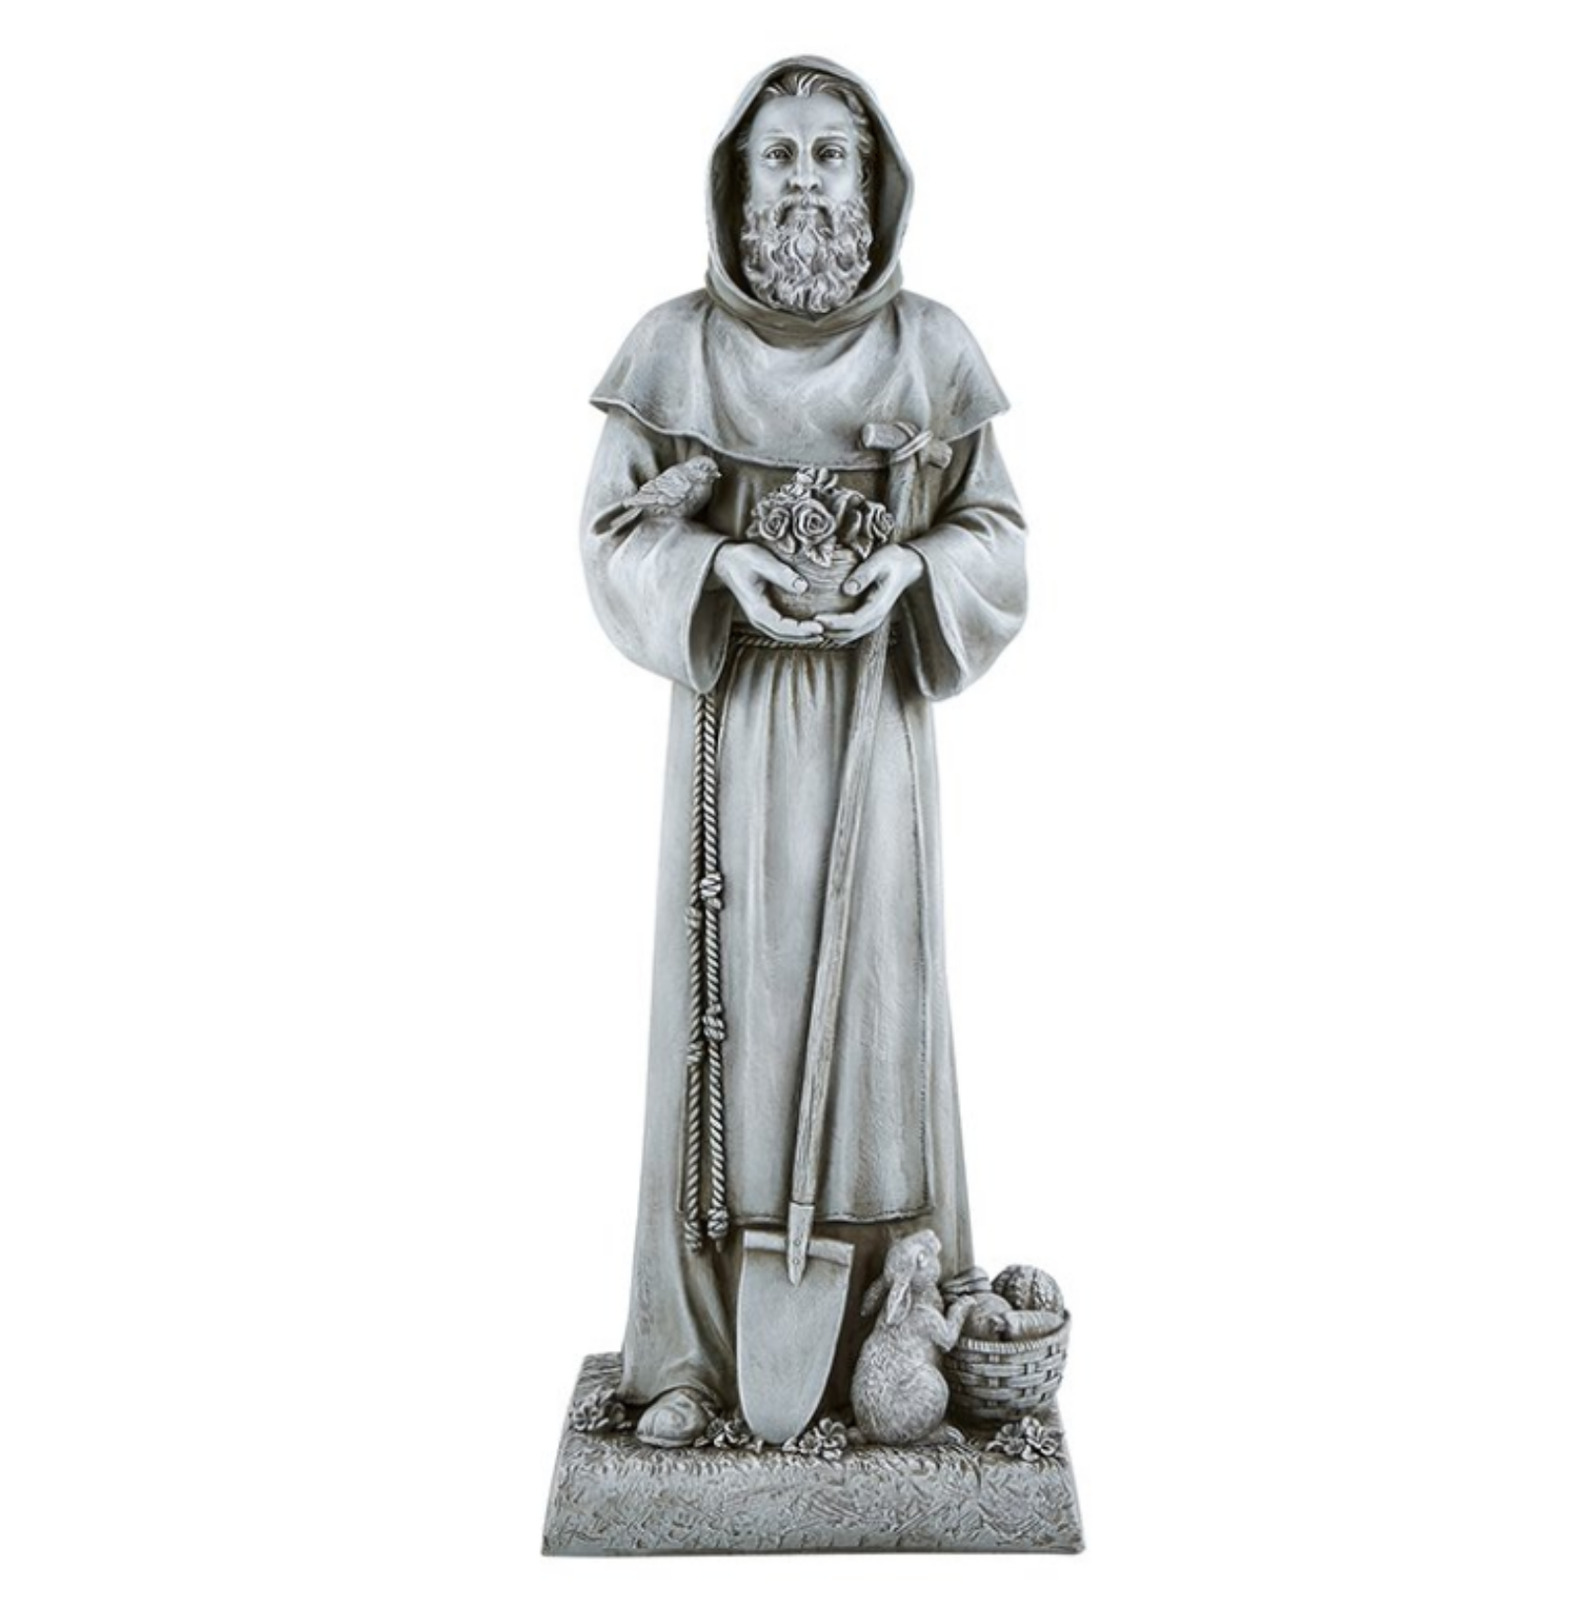 N.G. Saint Fiacre of Breuil Watching Over Garden Resin Statue, 24 Inch